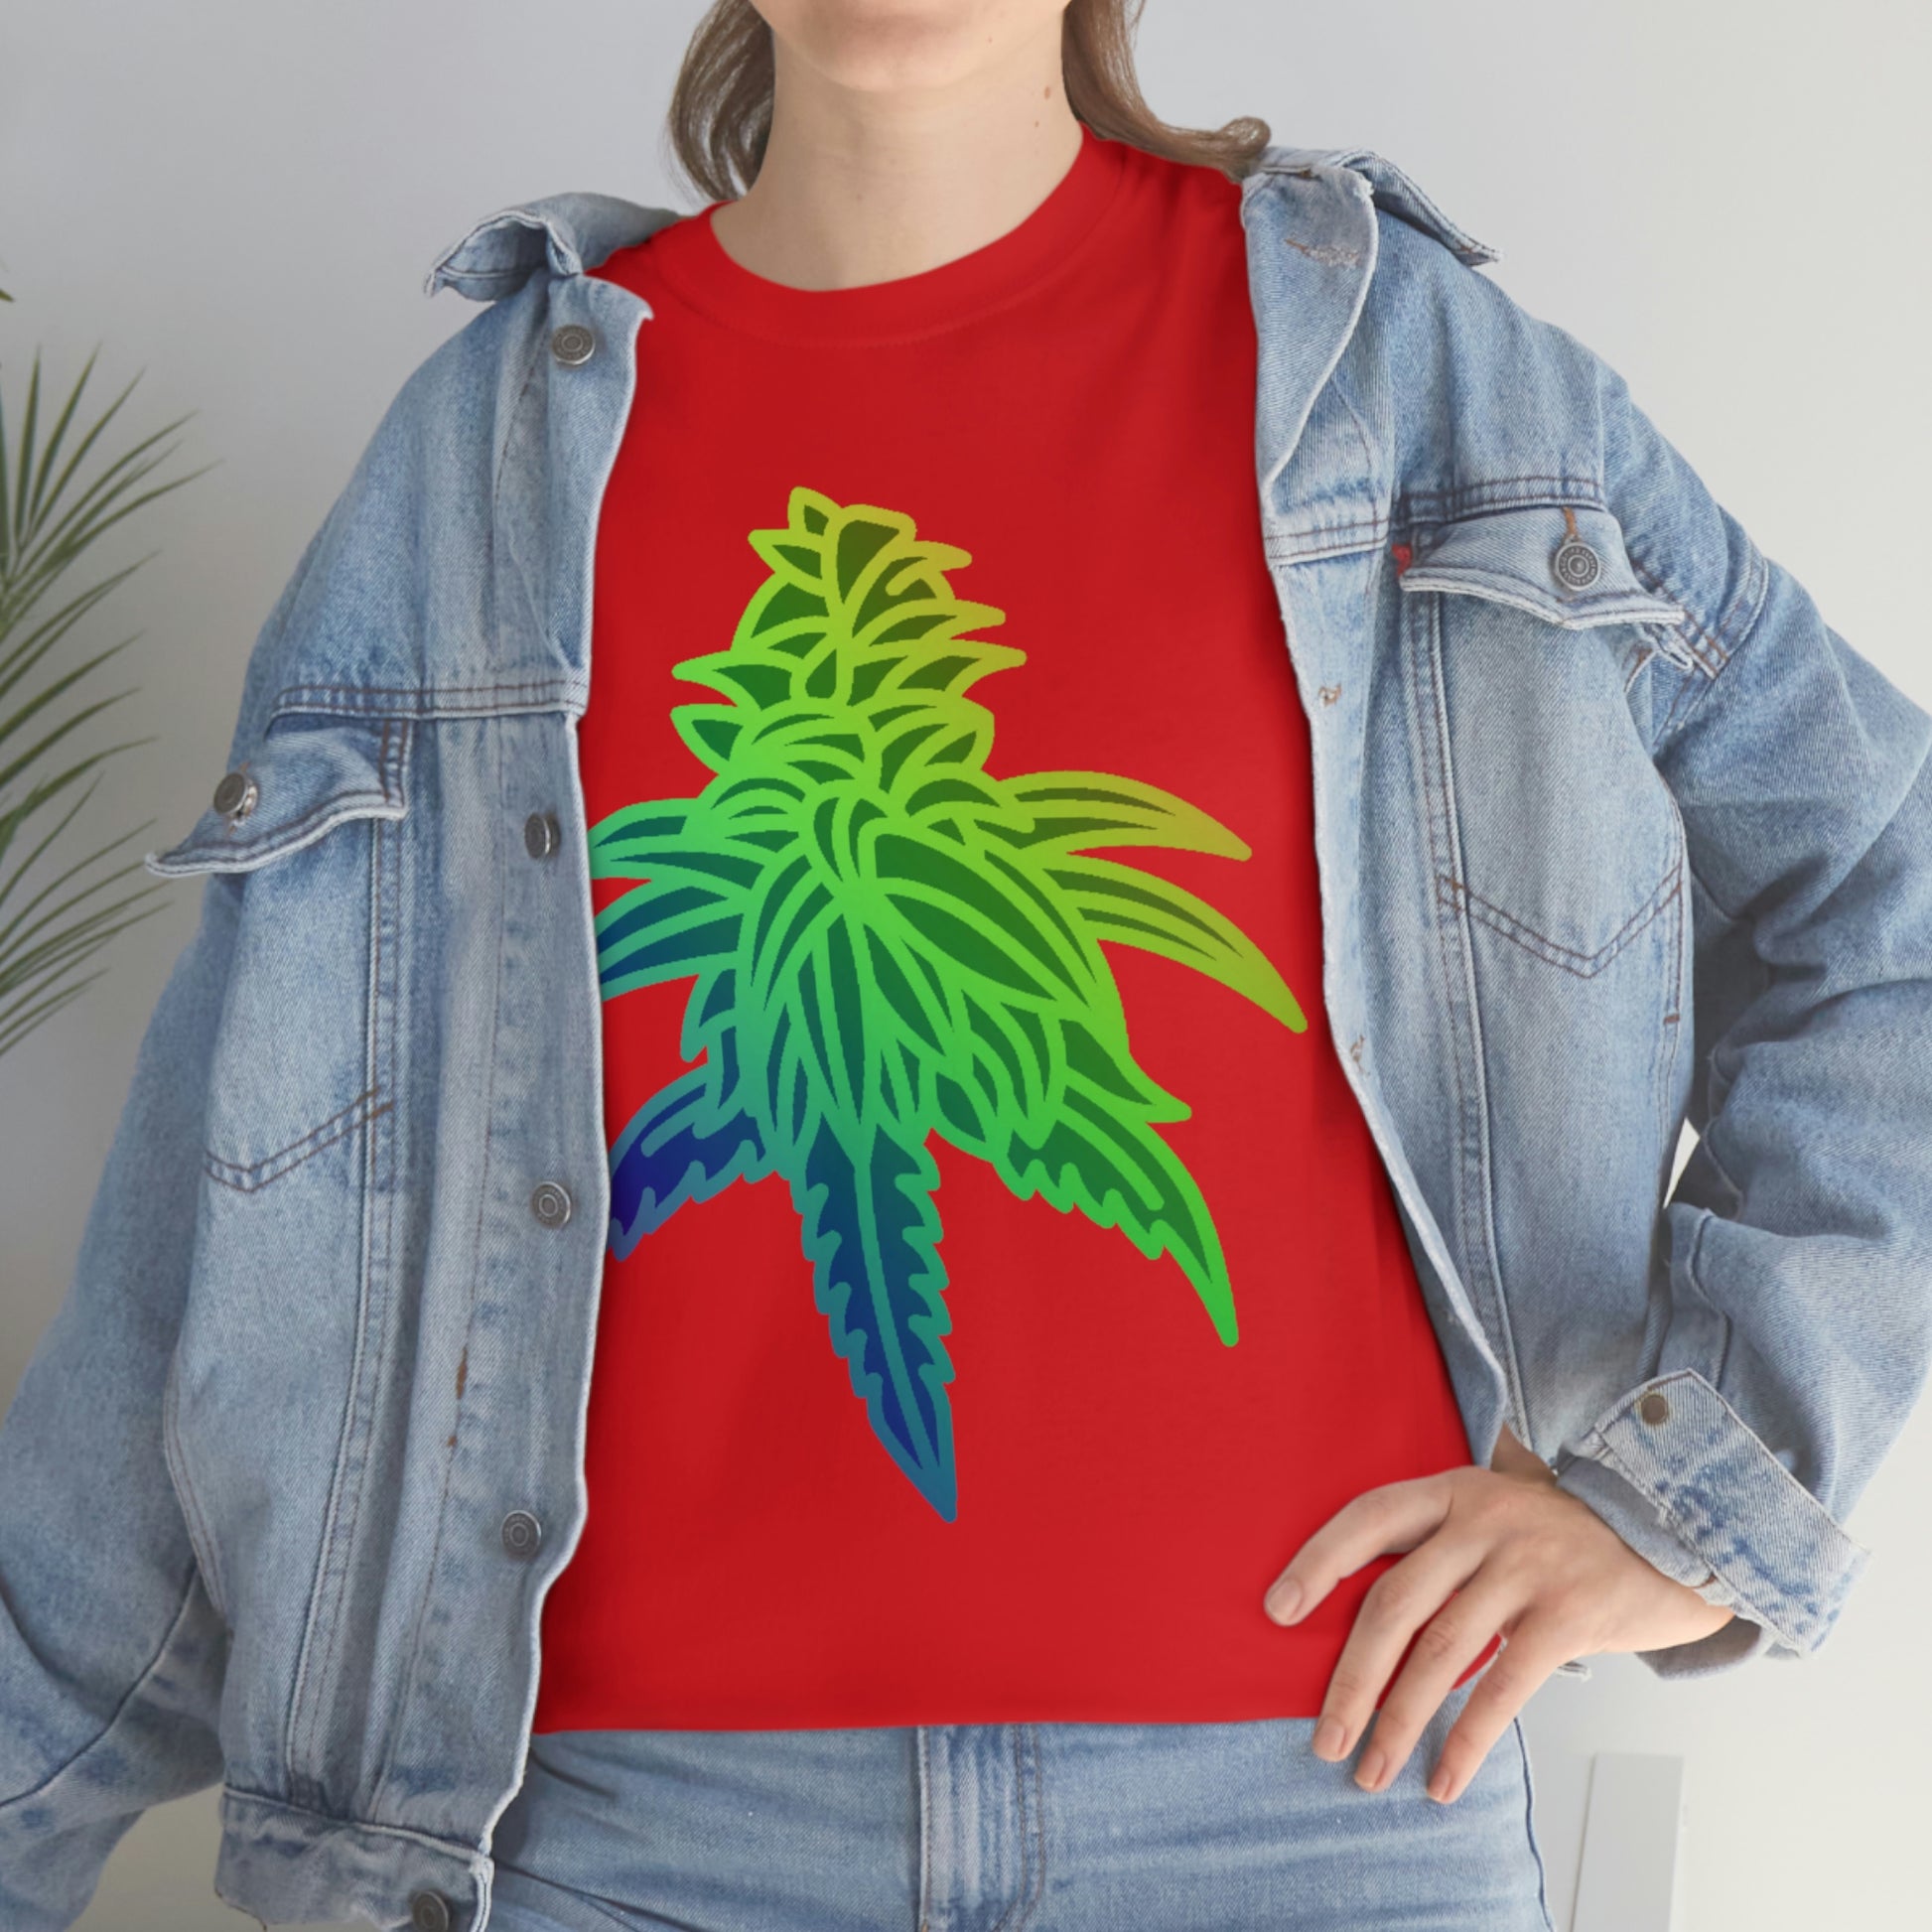 a woman wearing a Rainbow Sherbet Cannabis Tee and jeans.